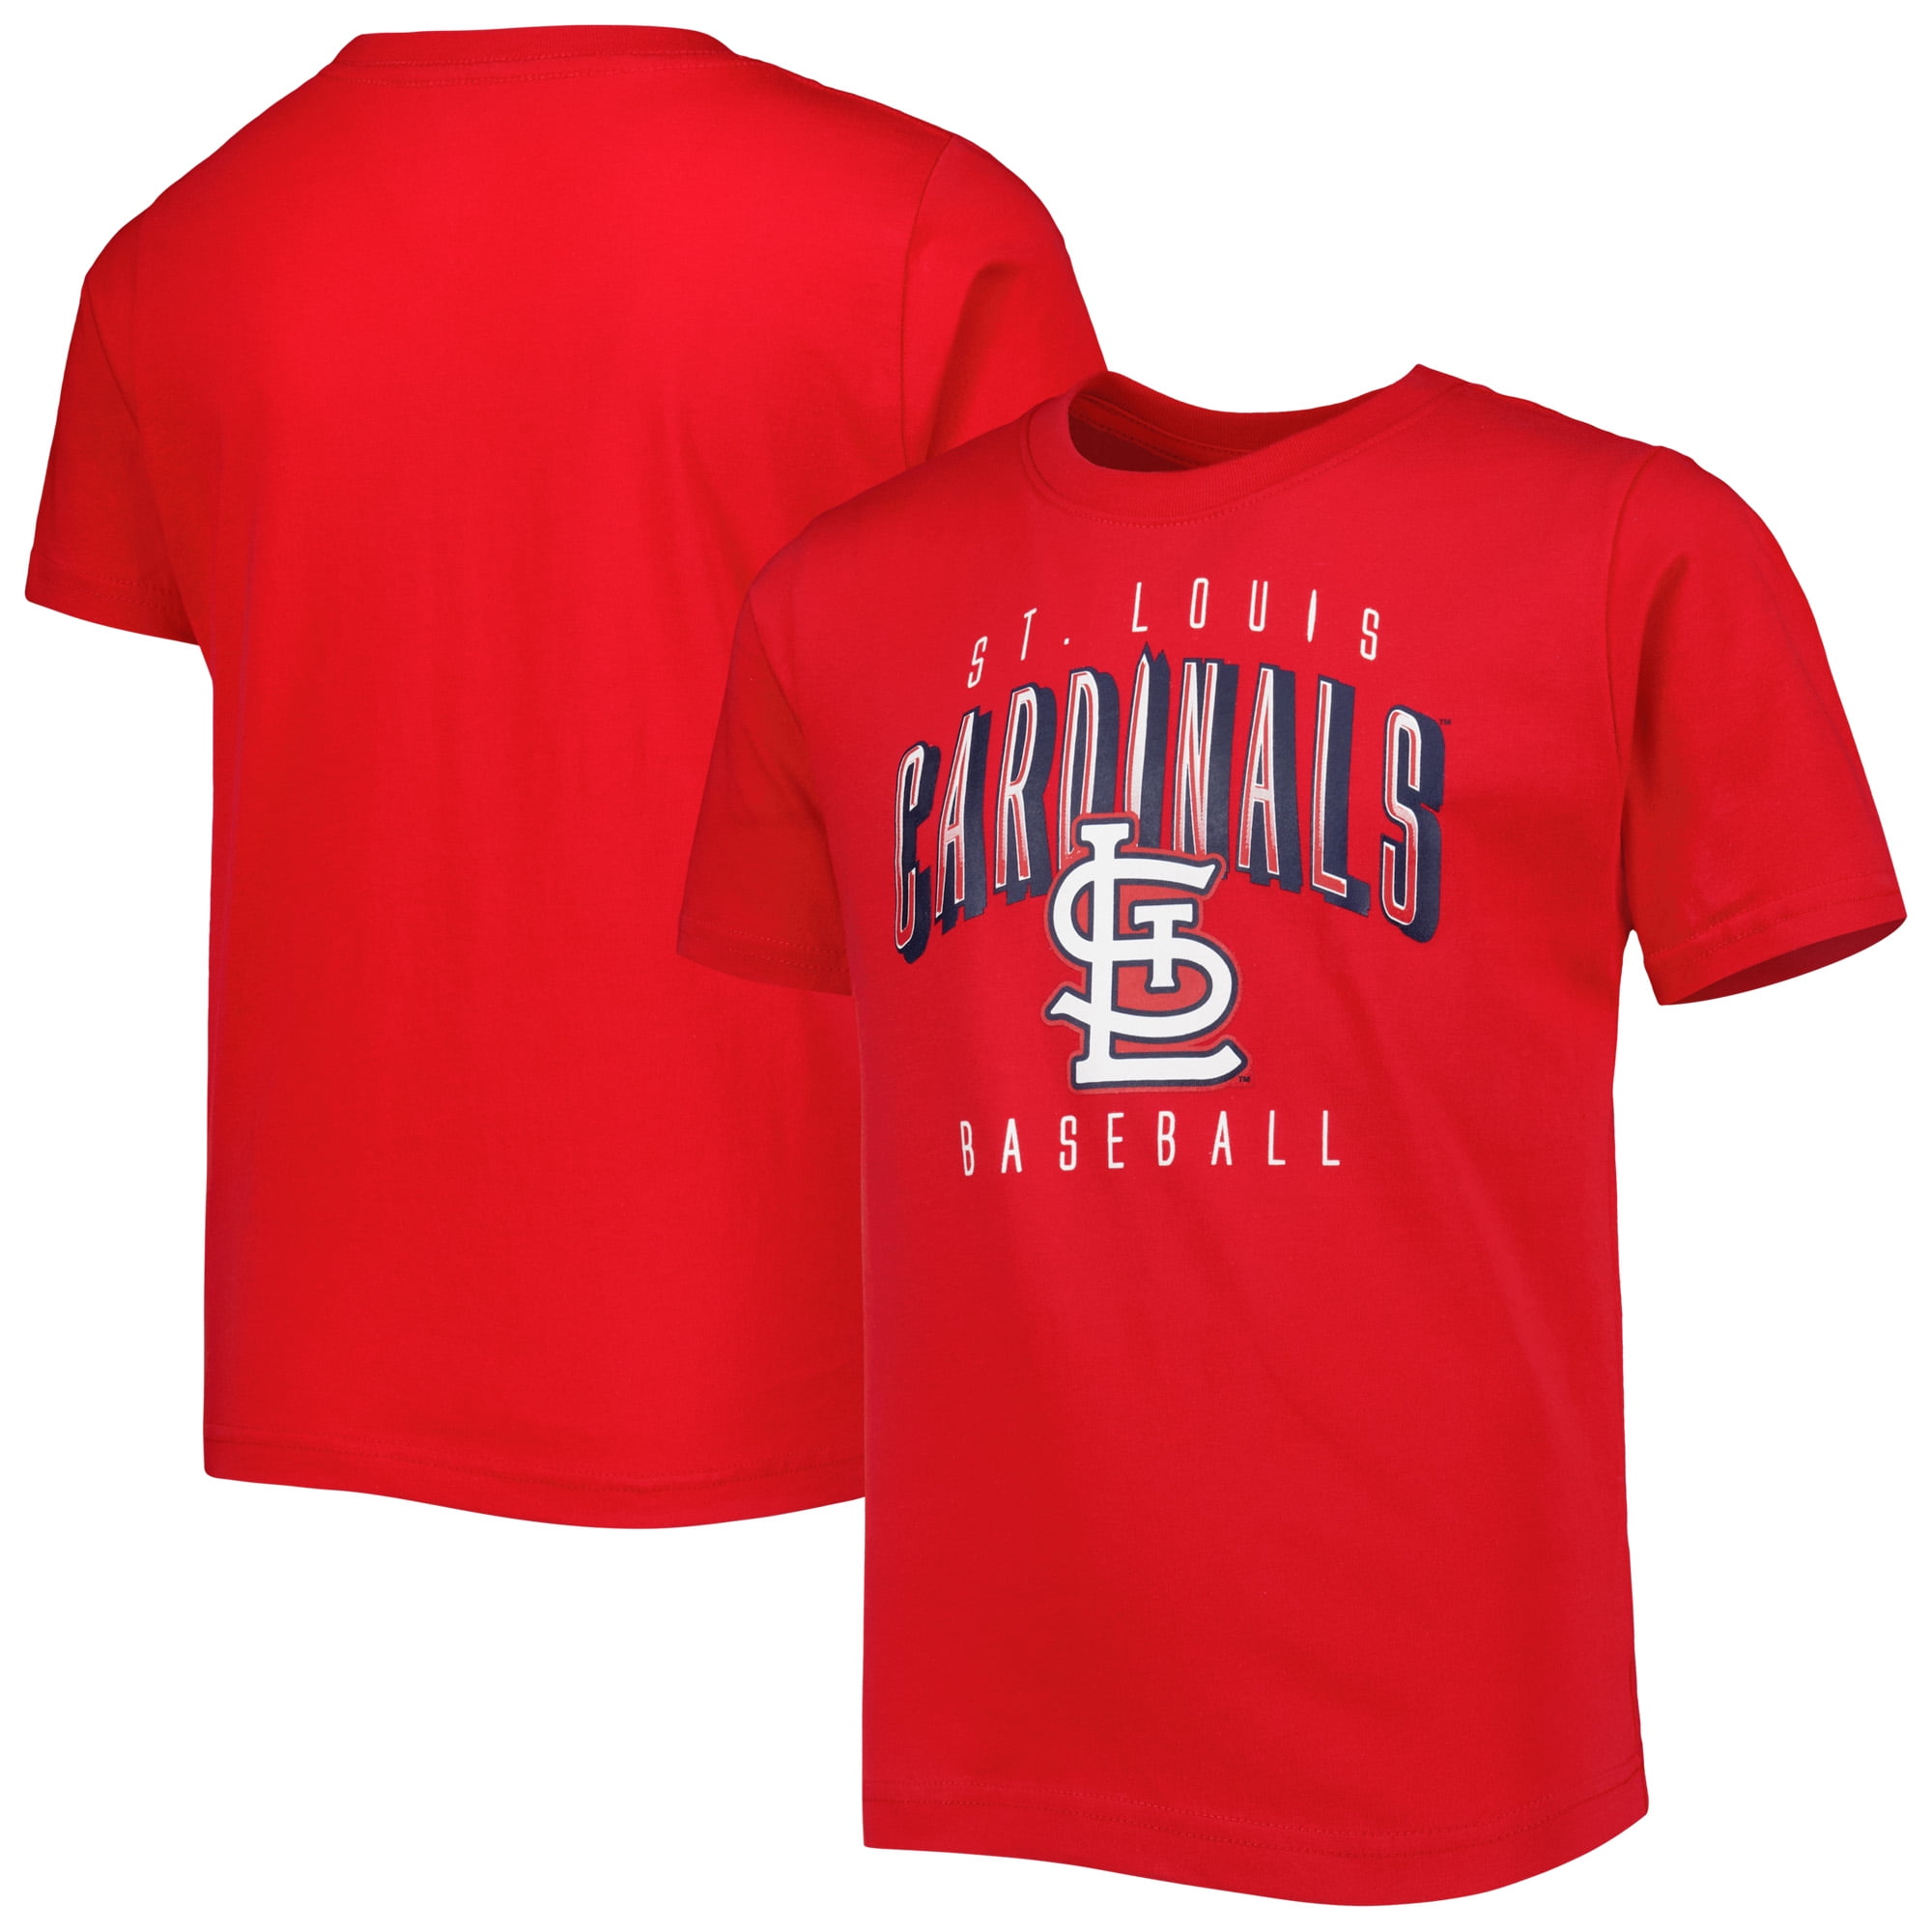 It Takes Someone Special To Be A St. Louis Cardinals Grandpa T